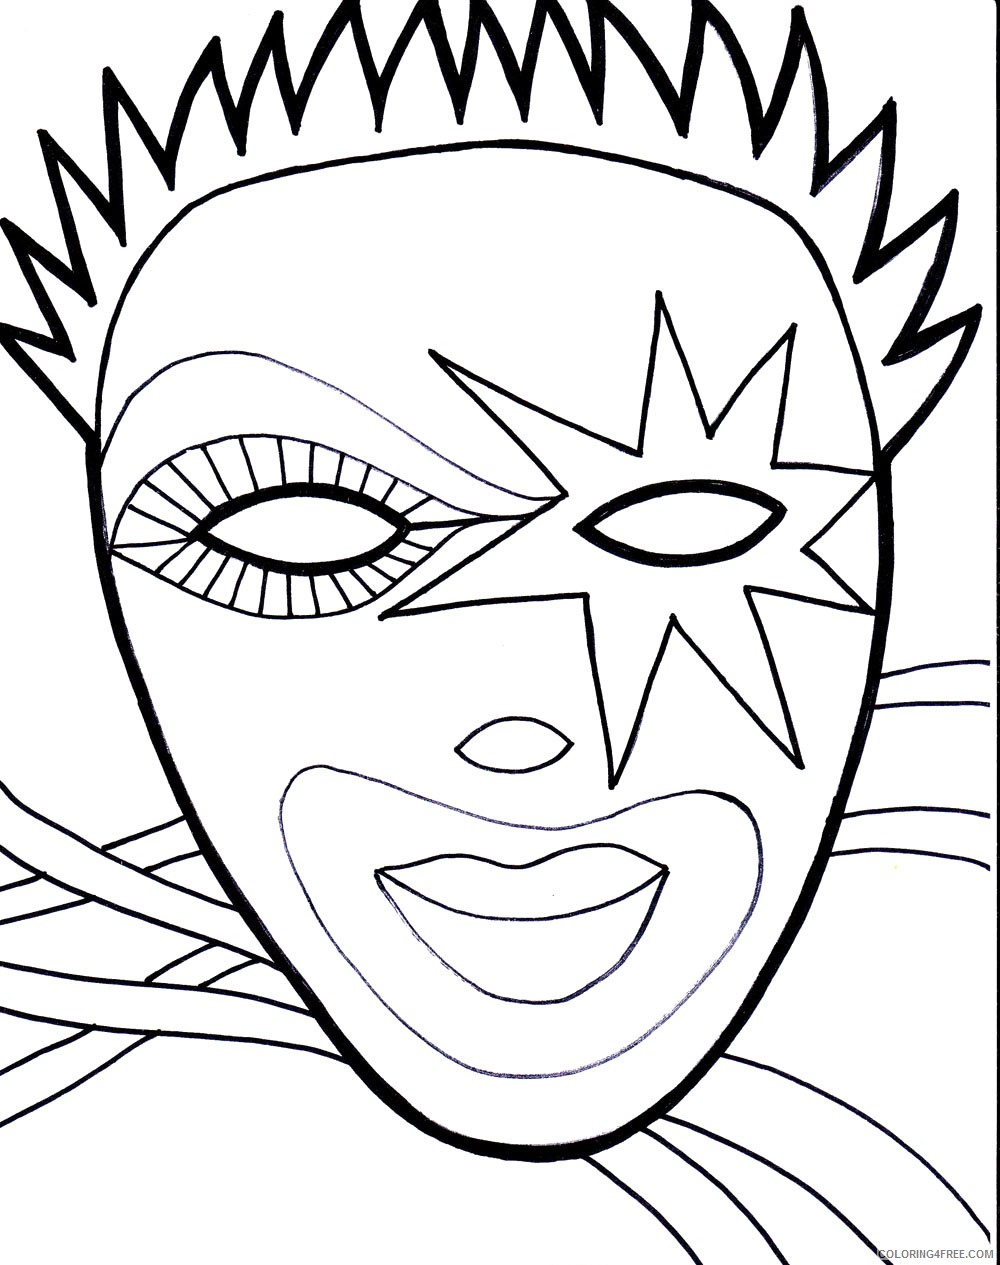 mardi gras coloring pages for boys Coloring4free